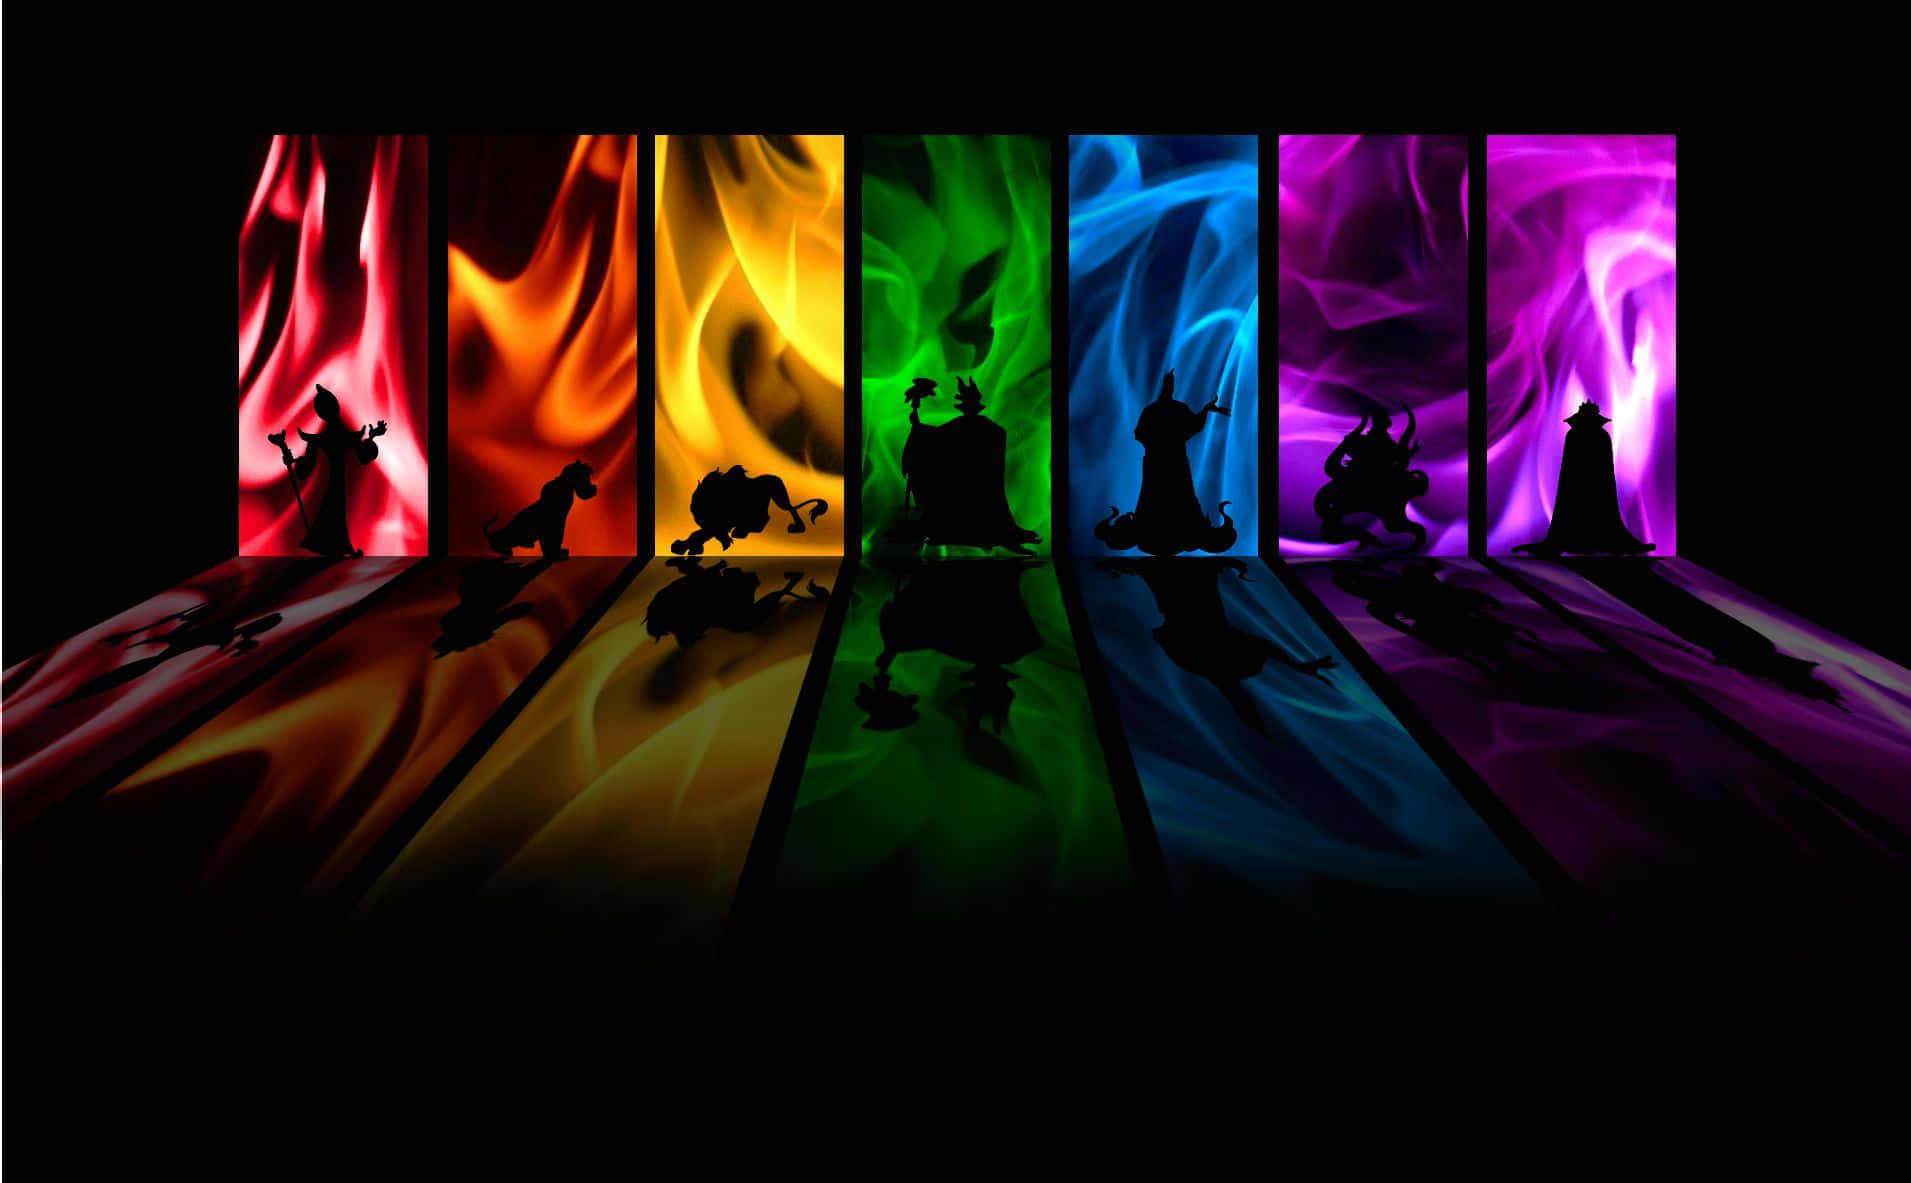 A Colorful Background With Silhouettes Of People